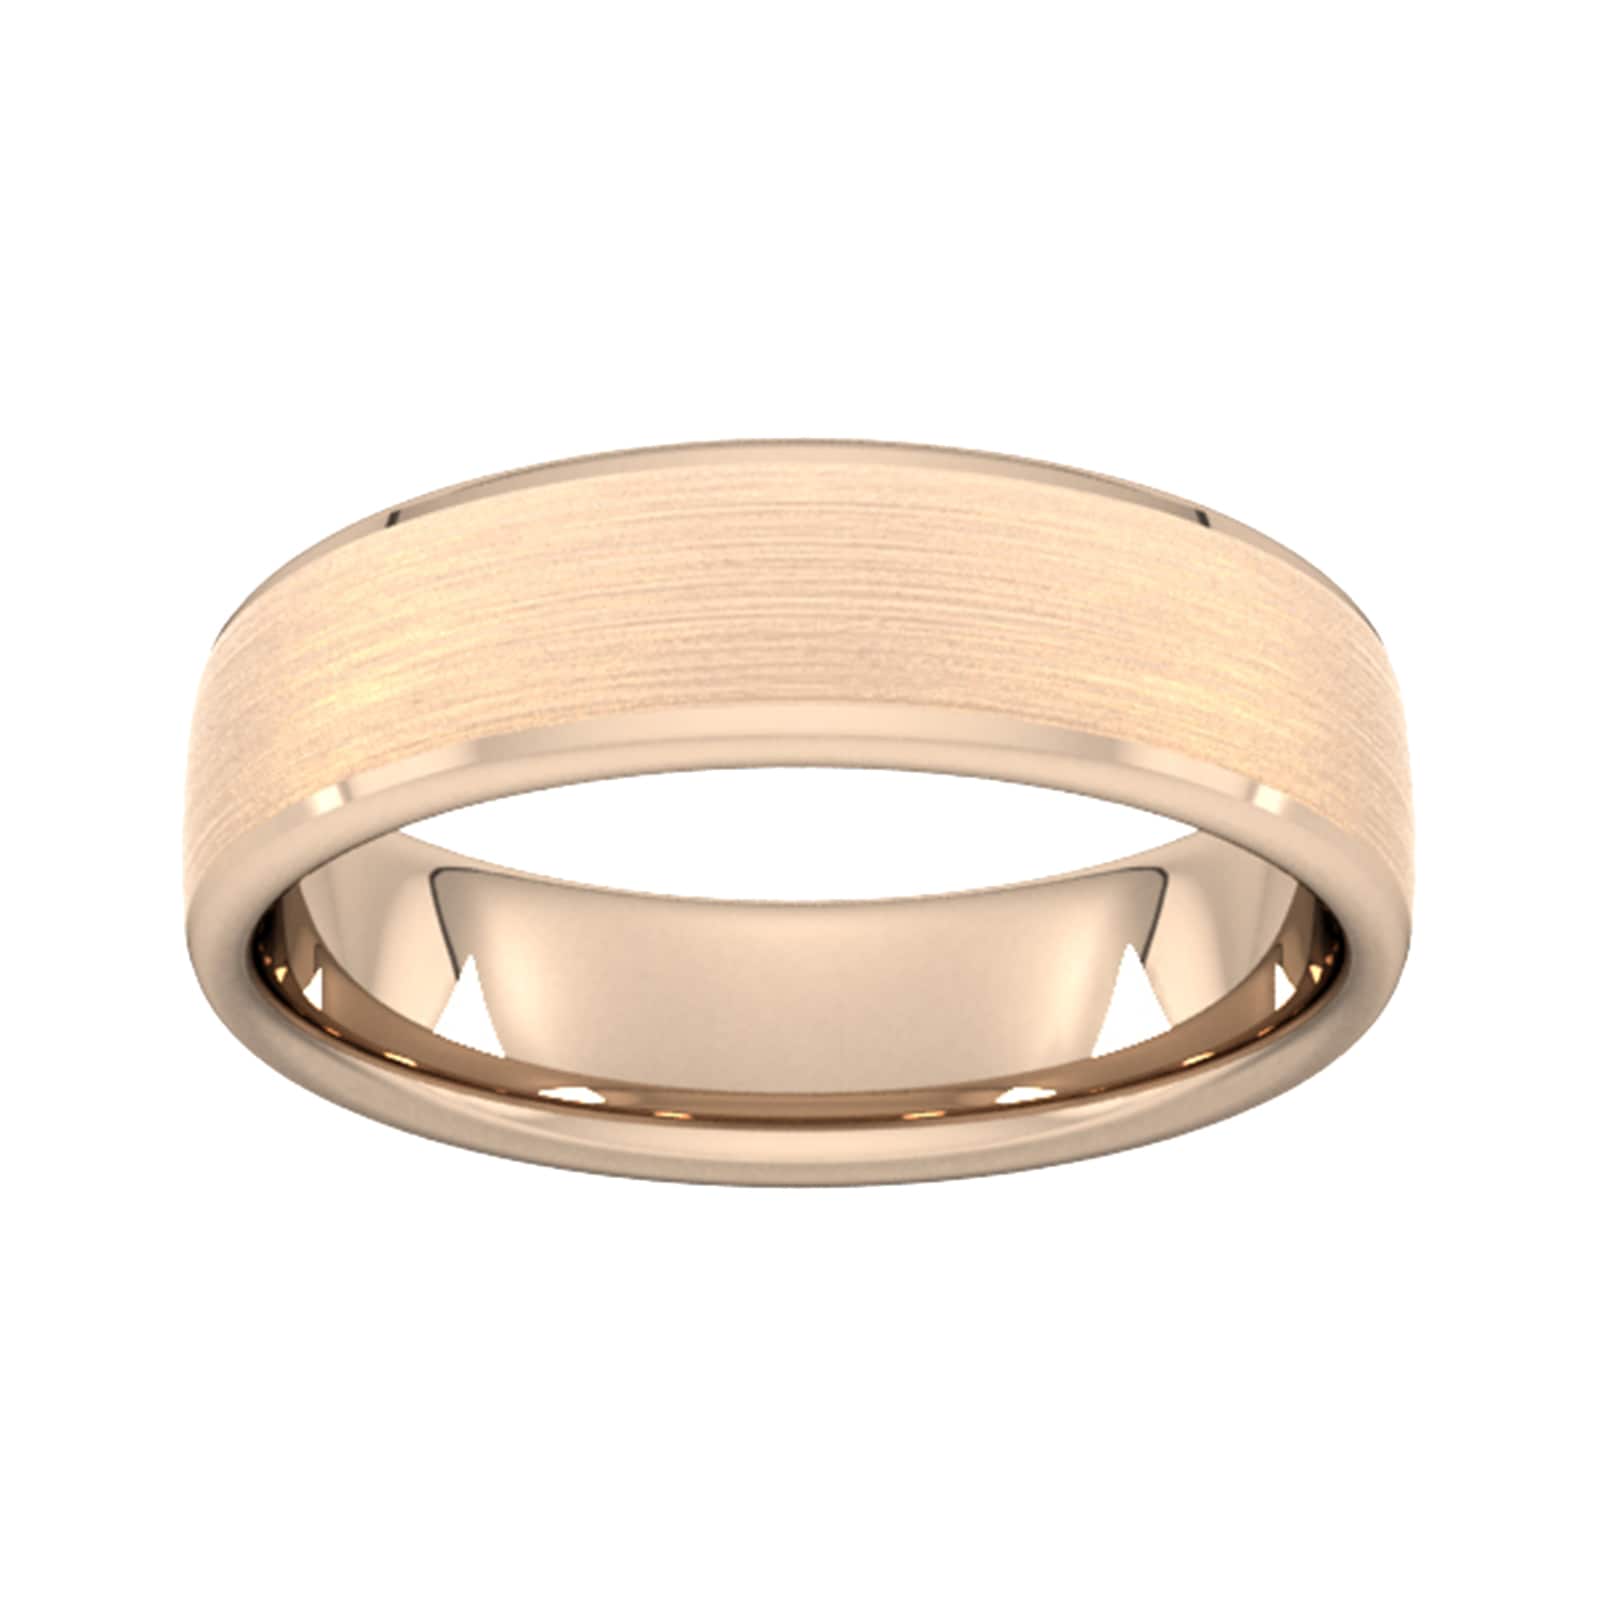 6mm Slight Court Heavy Polished Chamfered Edges With Matt Centre Wedding Ring In 18 Carat Rose Gold - Ring Size G